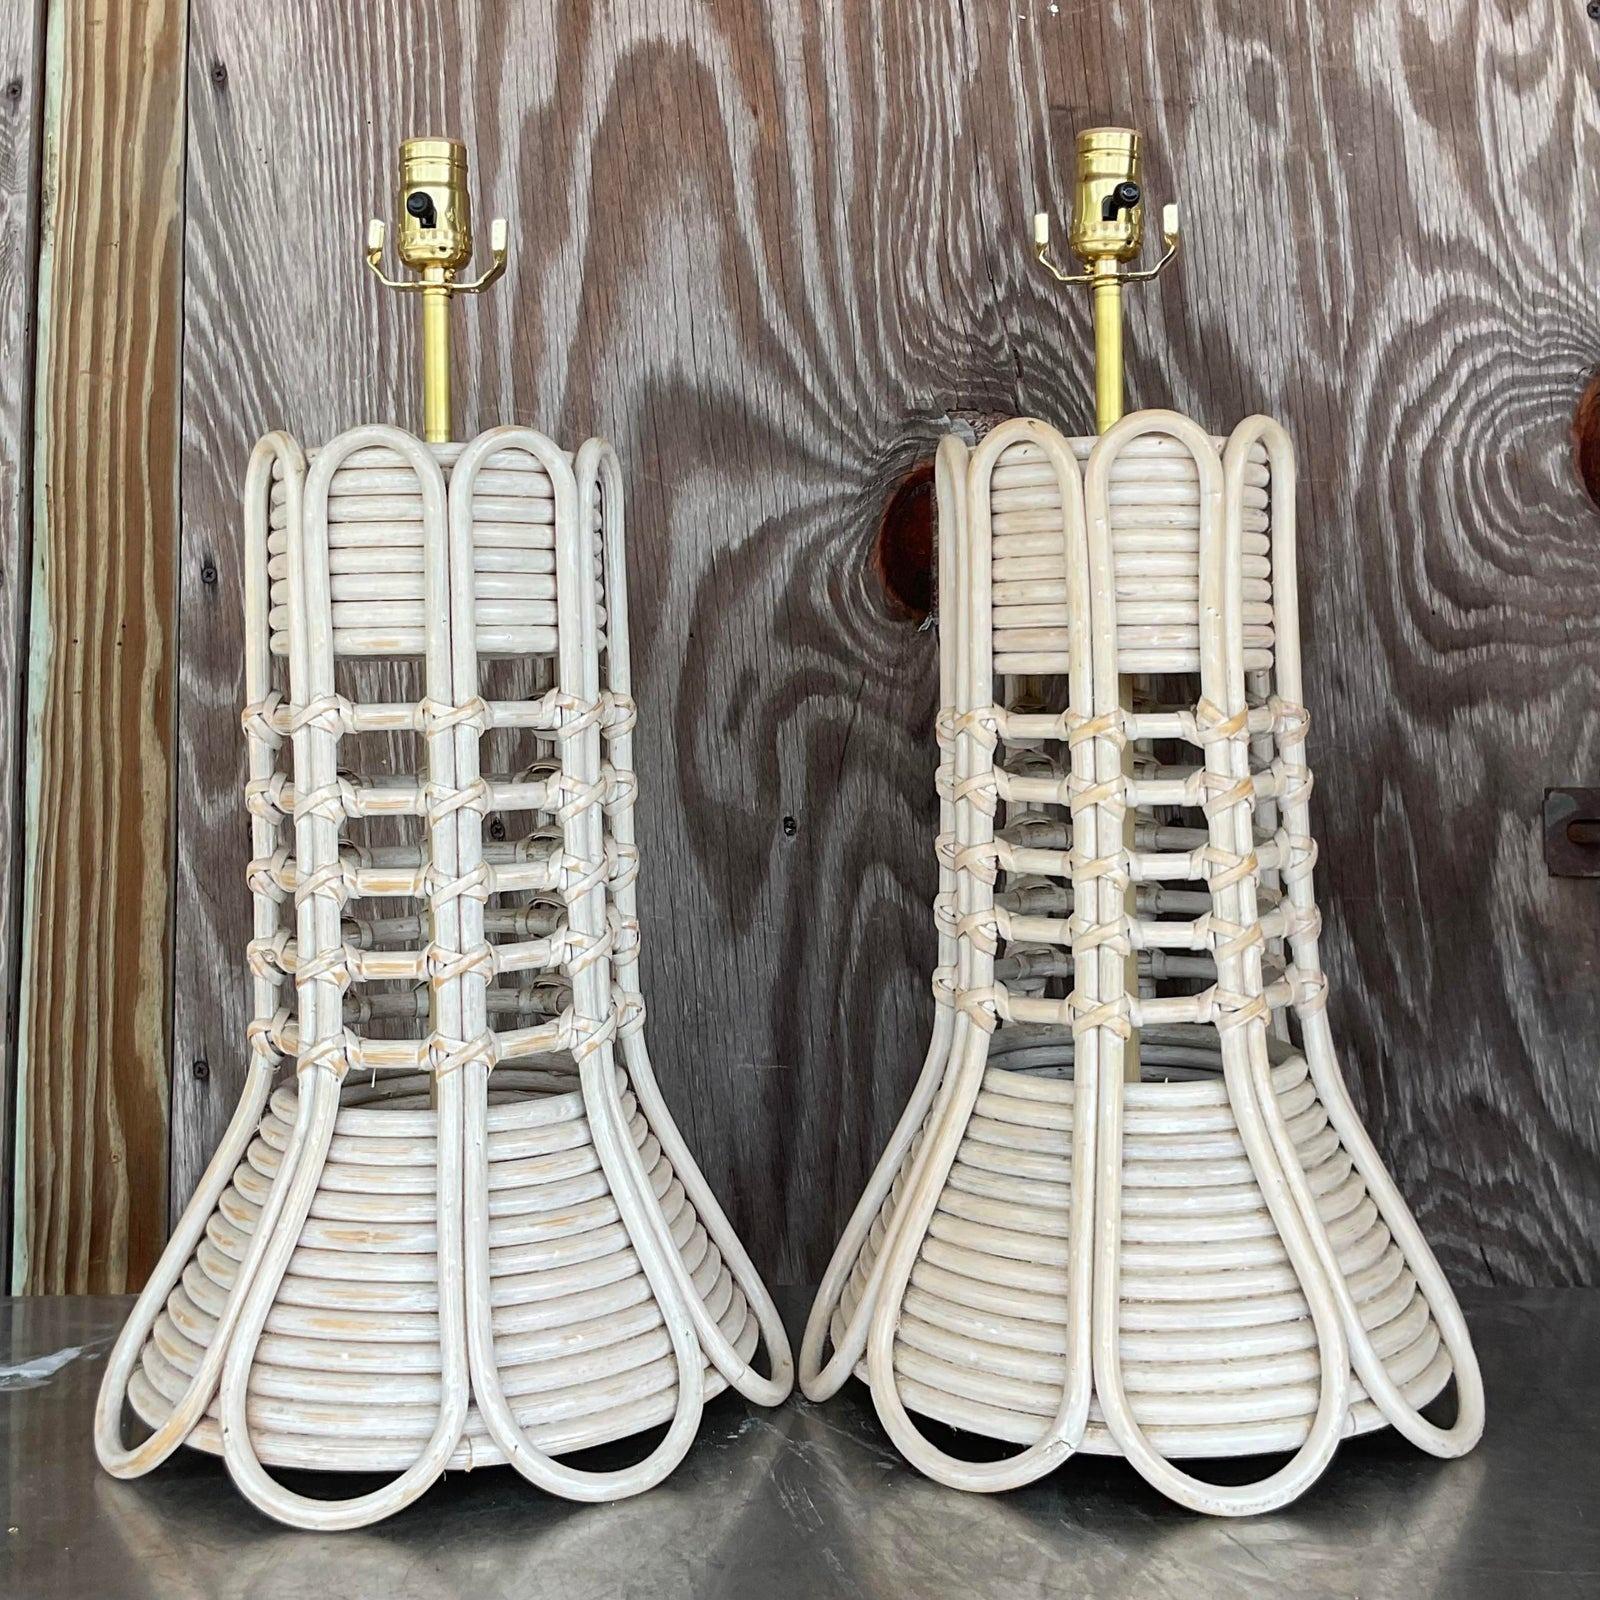 A fabulous pair of vintage Coastal table lamps. Chic bent rattan in an arched design. A cerused neutral finish. Fully restored with all new wiring and hardware. Acquired from a Palm Beach estate.